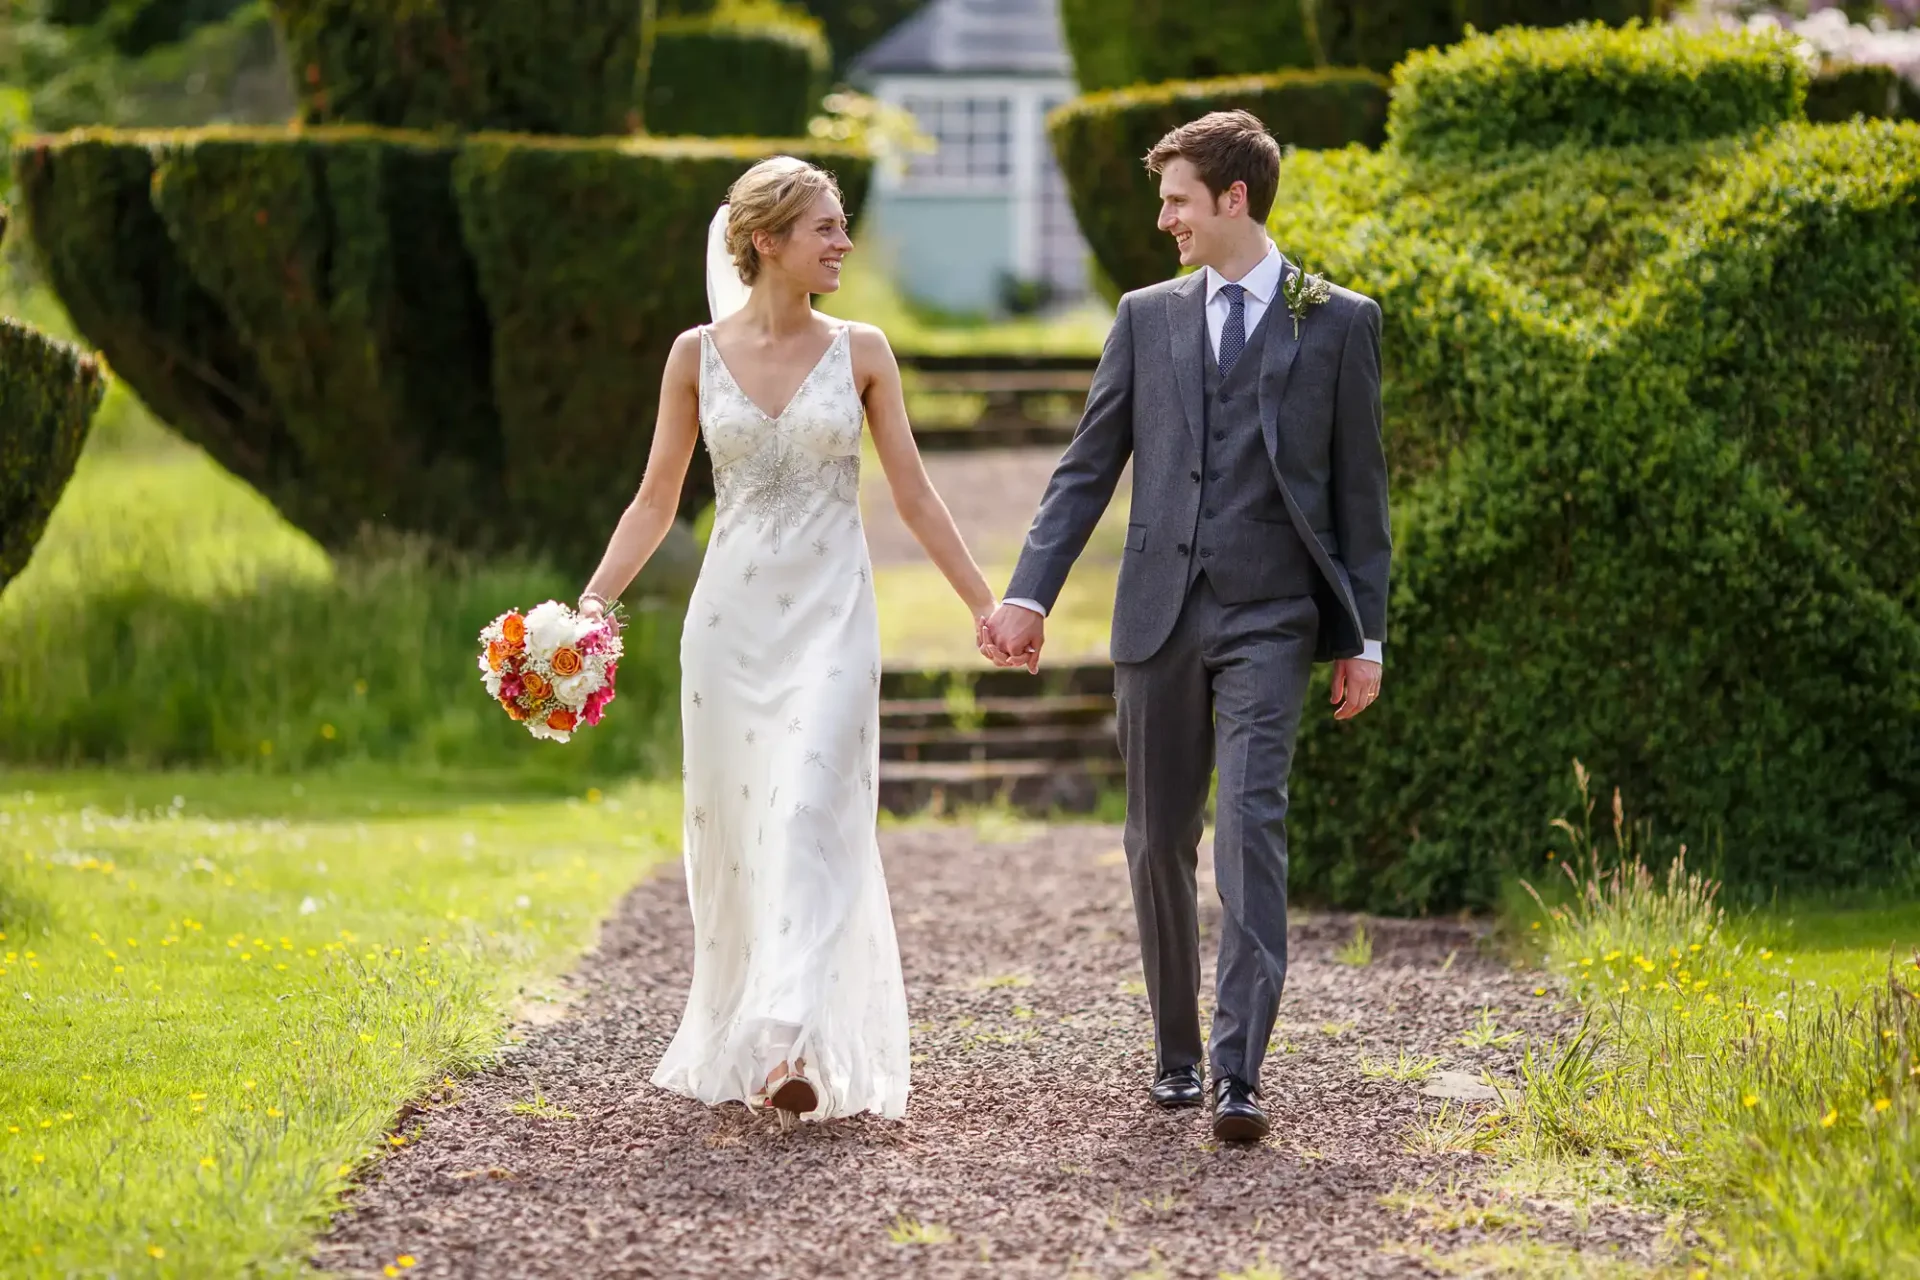 A bride in a white dress and a groom in a grey suit walk hand in hand on a garden path, smiling at each other. The bride holds a bouquet of flowers.